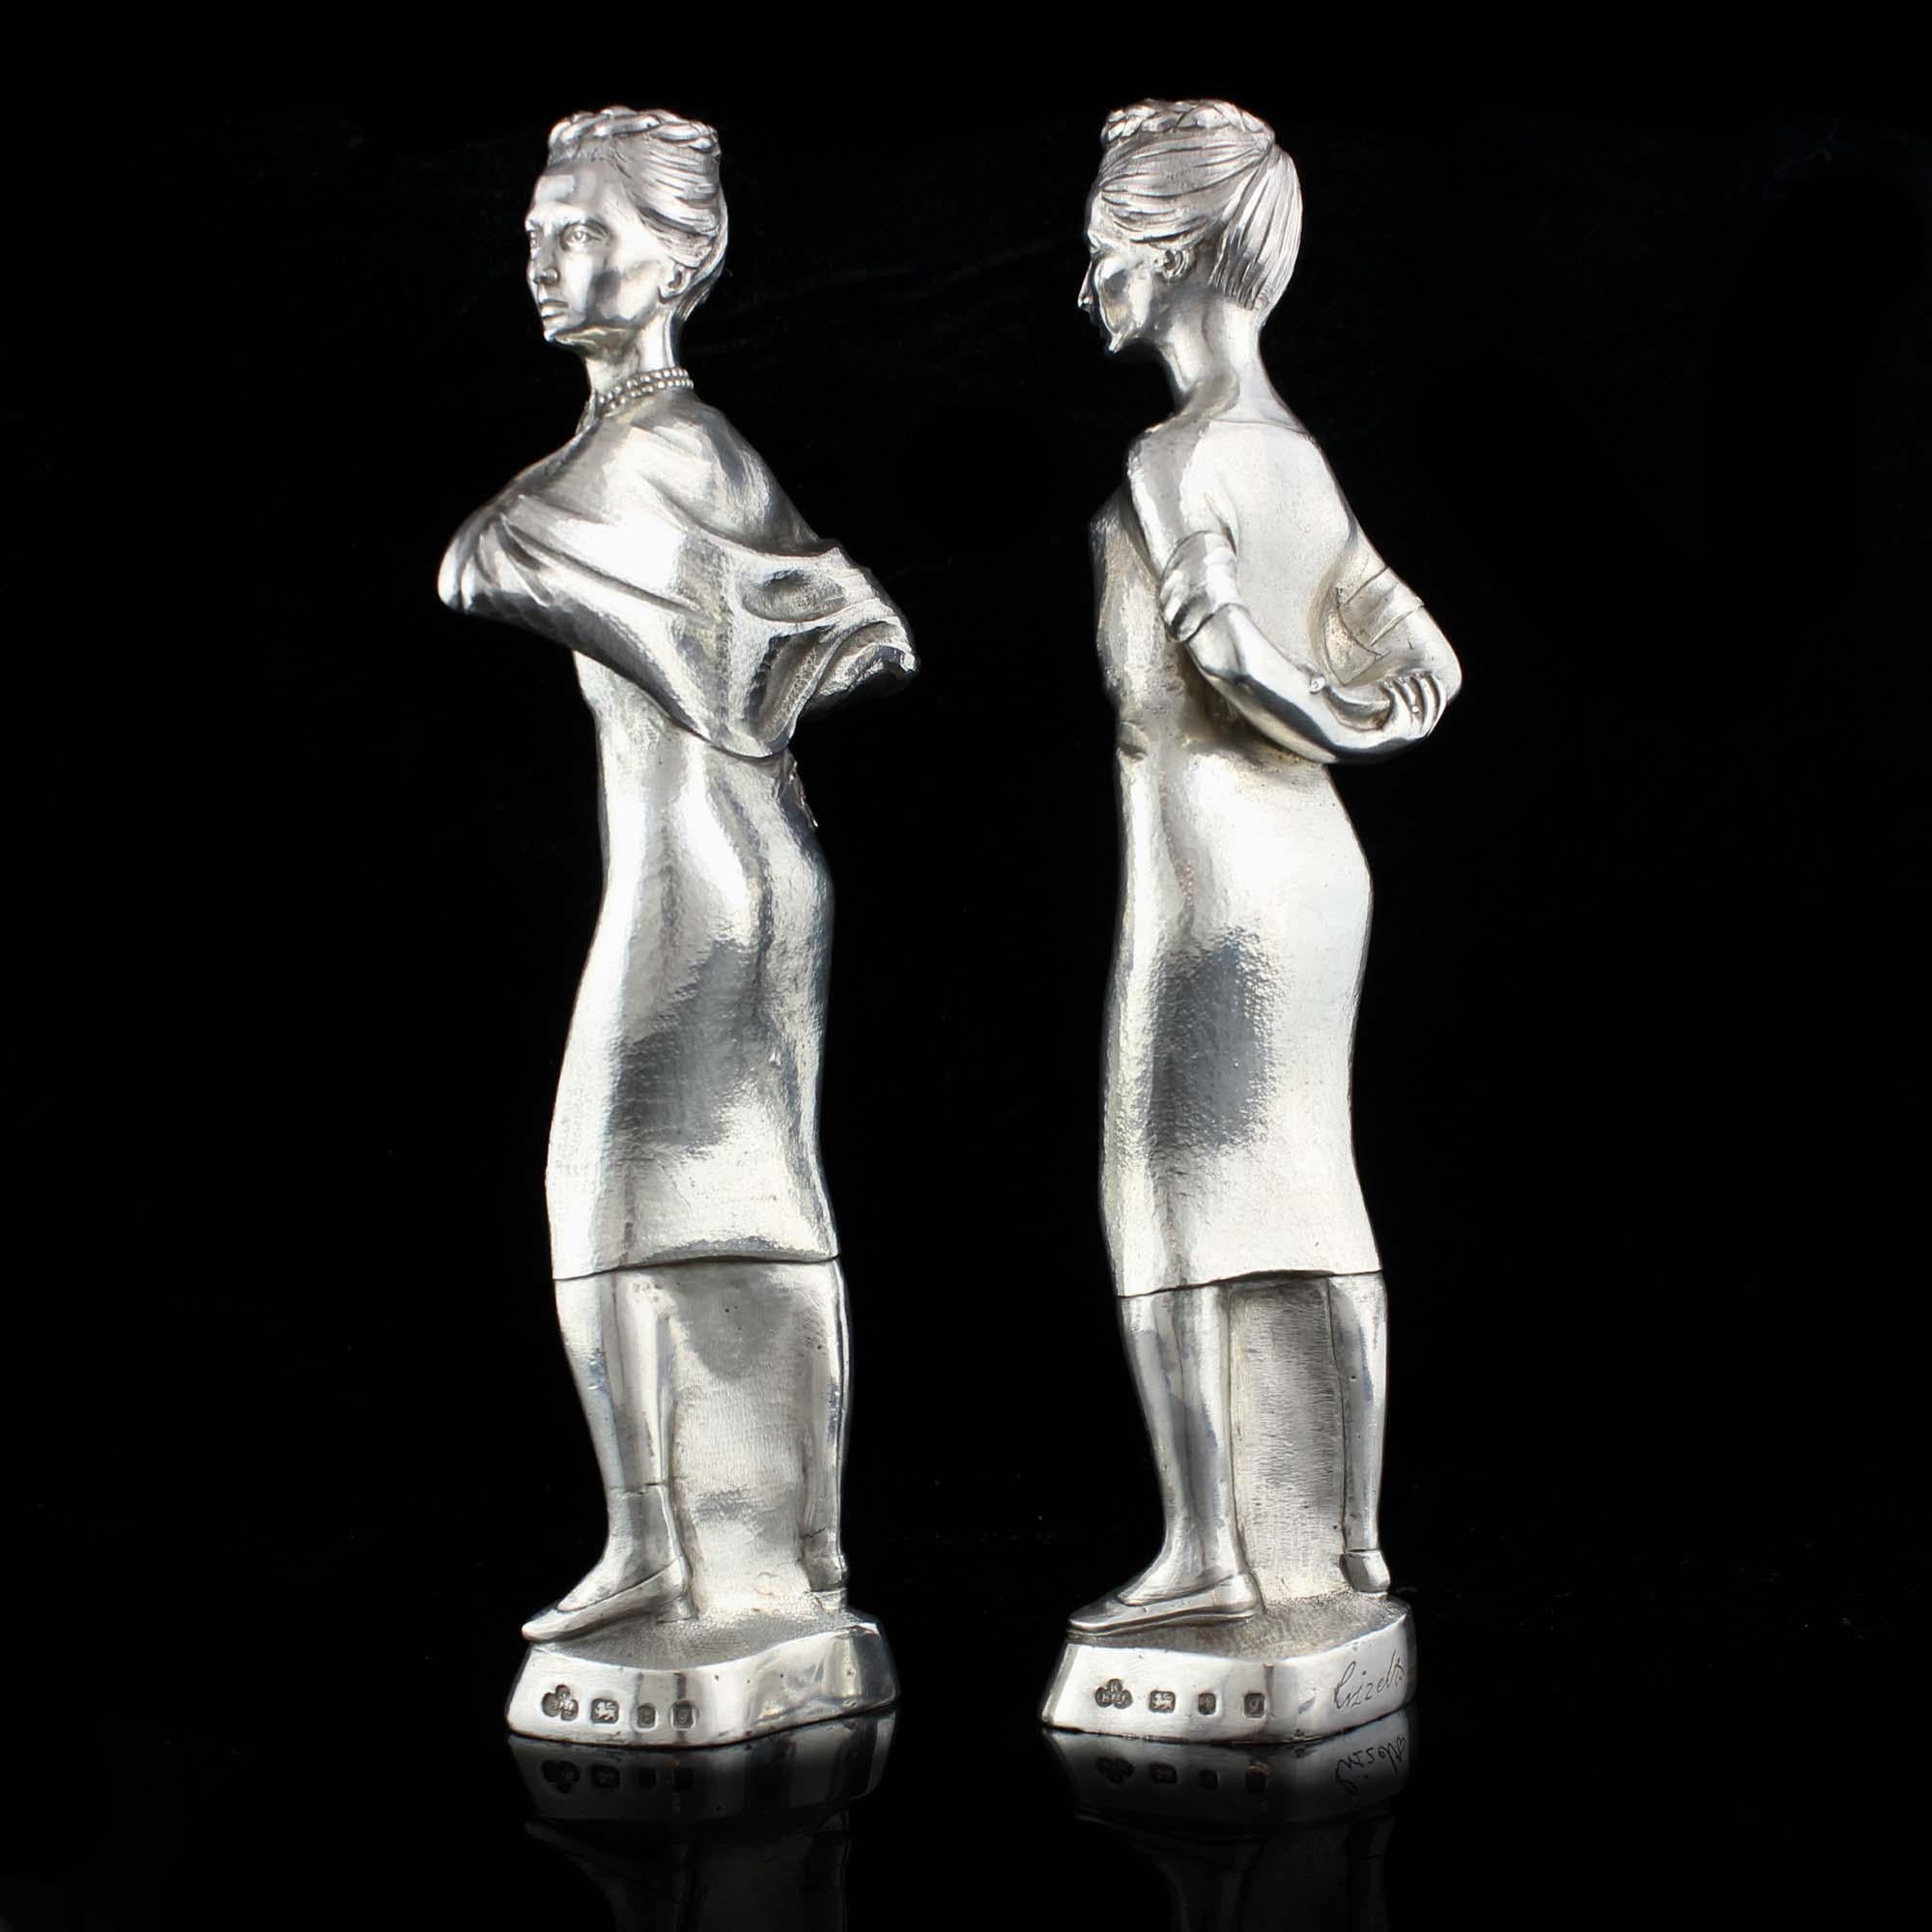 Vintage sterling silver pair of candlesticks in the shape of a two ladies.

Made in England, London, 1962
Maker: Nayler Brothers
Fully hallmarked.

Dimensions:
1st candlestick length x width x height 5.6 x 4.2 x 22.2 cm
2nd candlestick